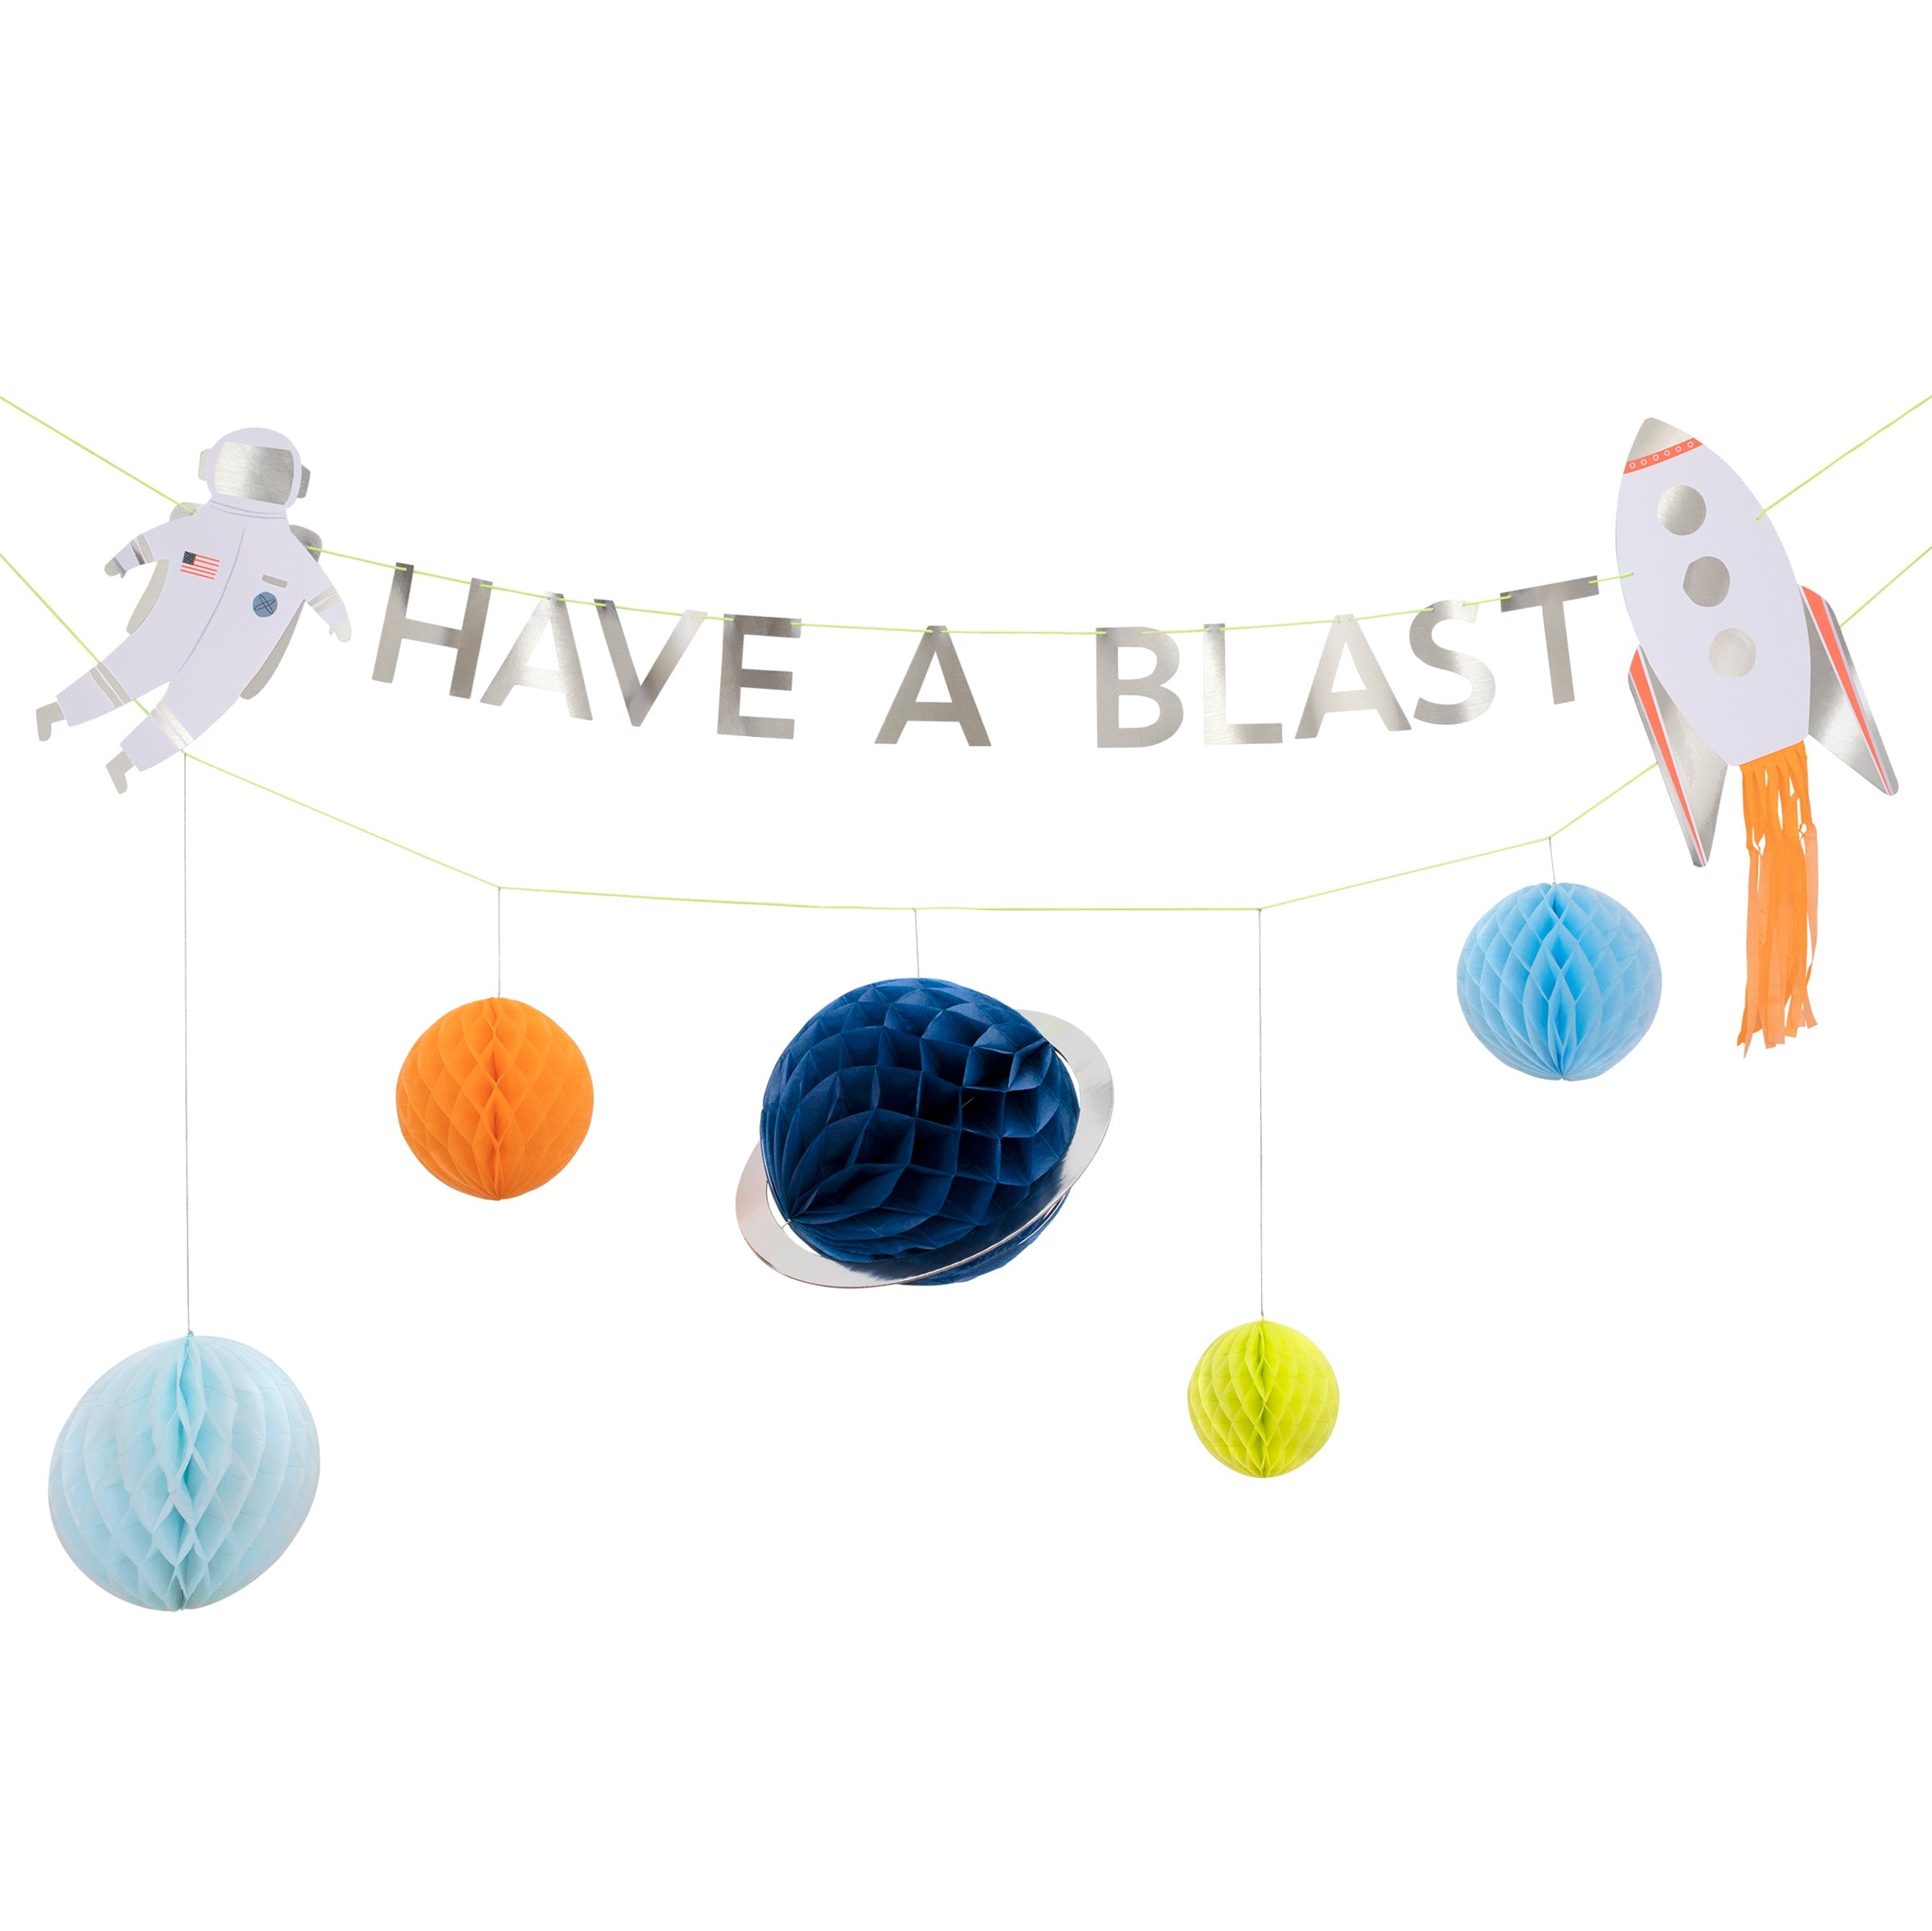 Our party garland, designed for a space party, features 3D planets, an astronaut and a shiny rocket with fire details.